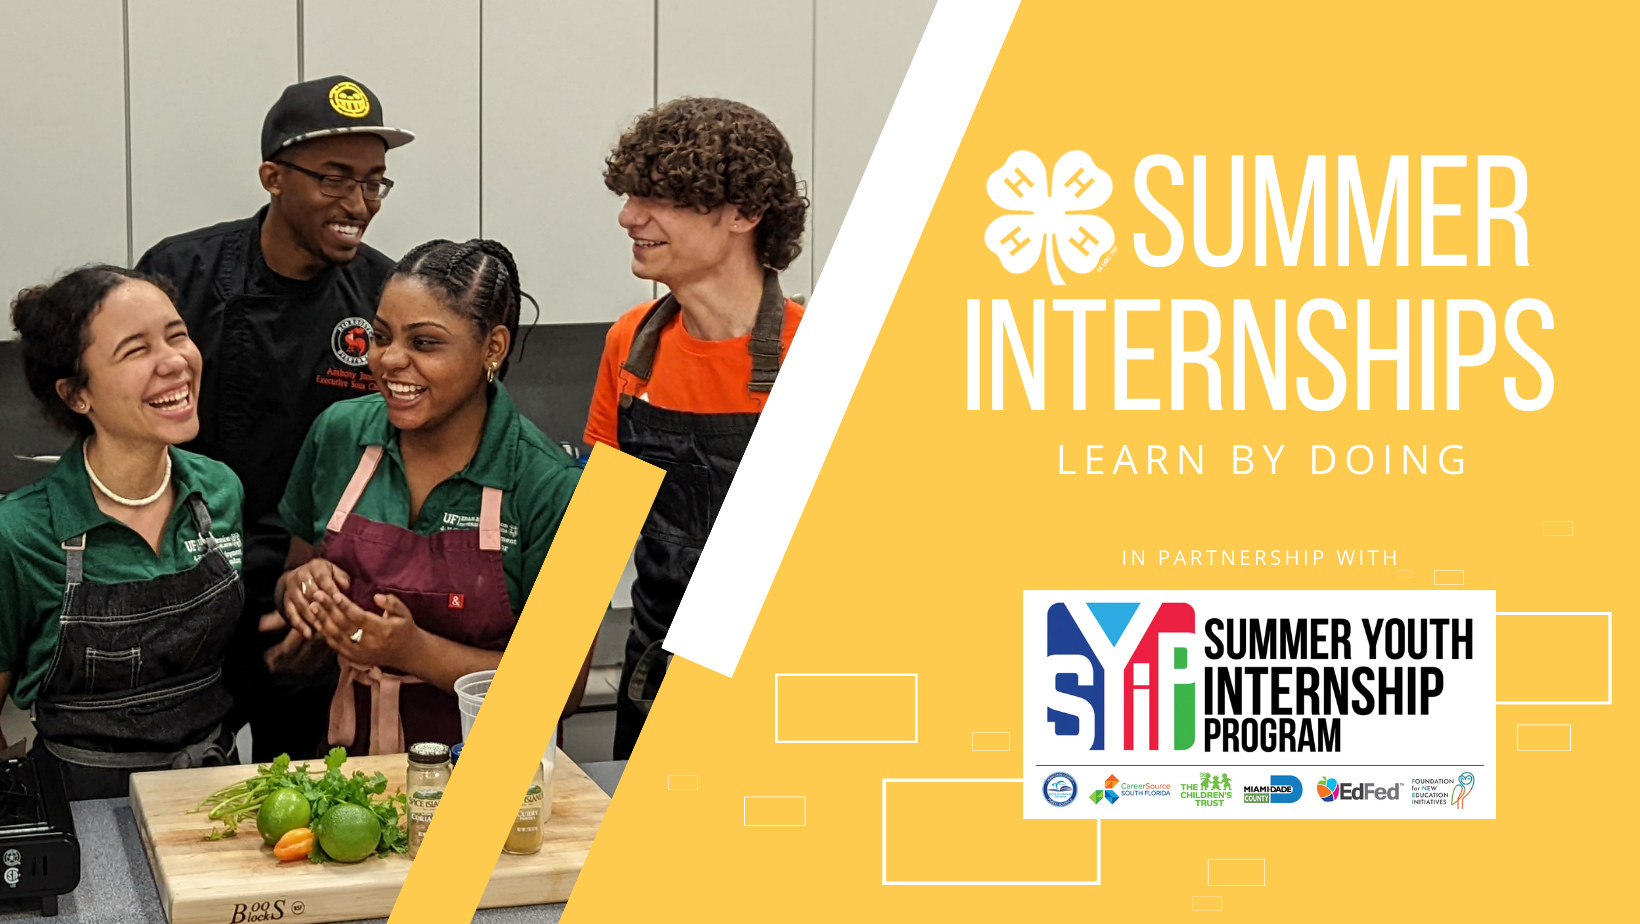 4H Summer Internships in Miami UF/IFAS Extension MiamiDade County